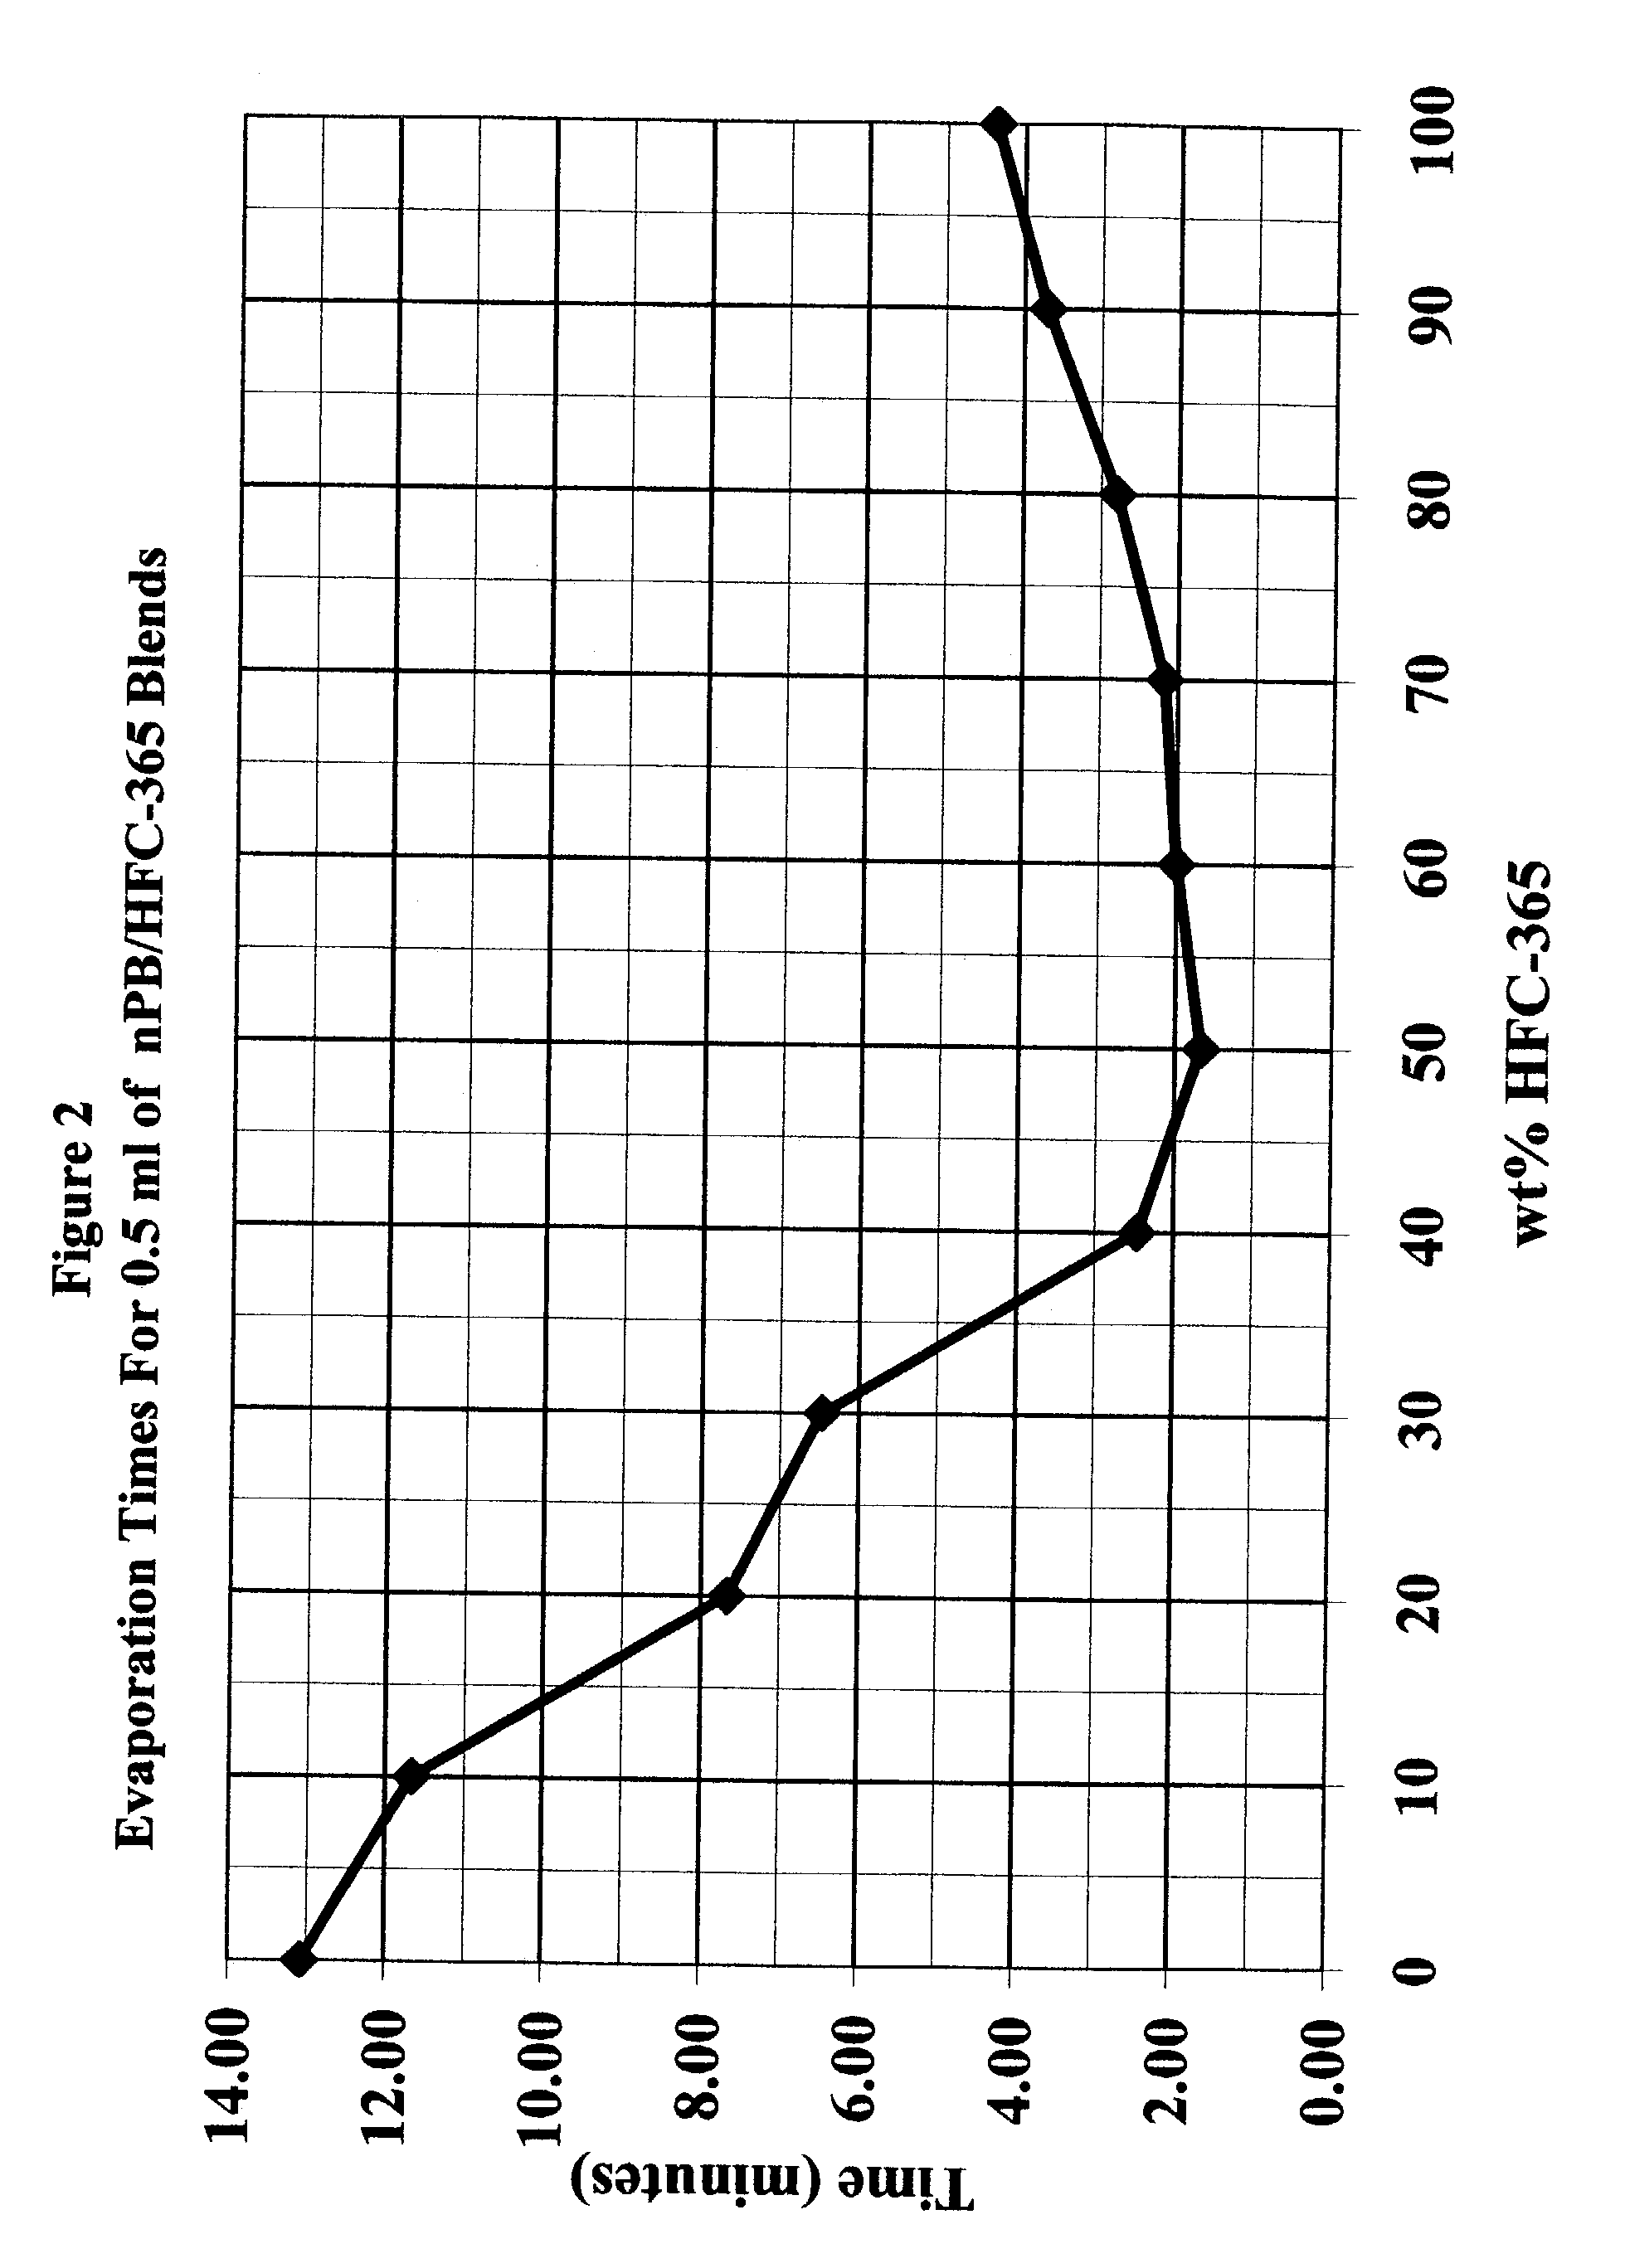 Compositions comprised of normal propyl bromide and 1,1,1,3,3-pentafluorobutane and uses thereof